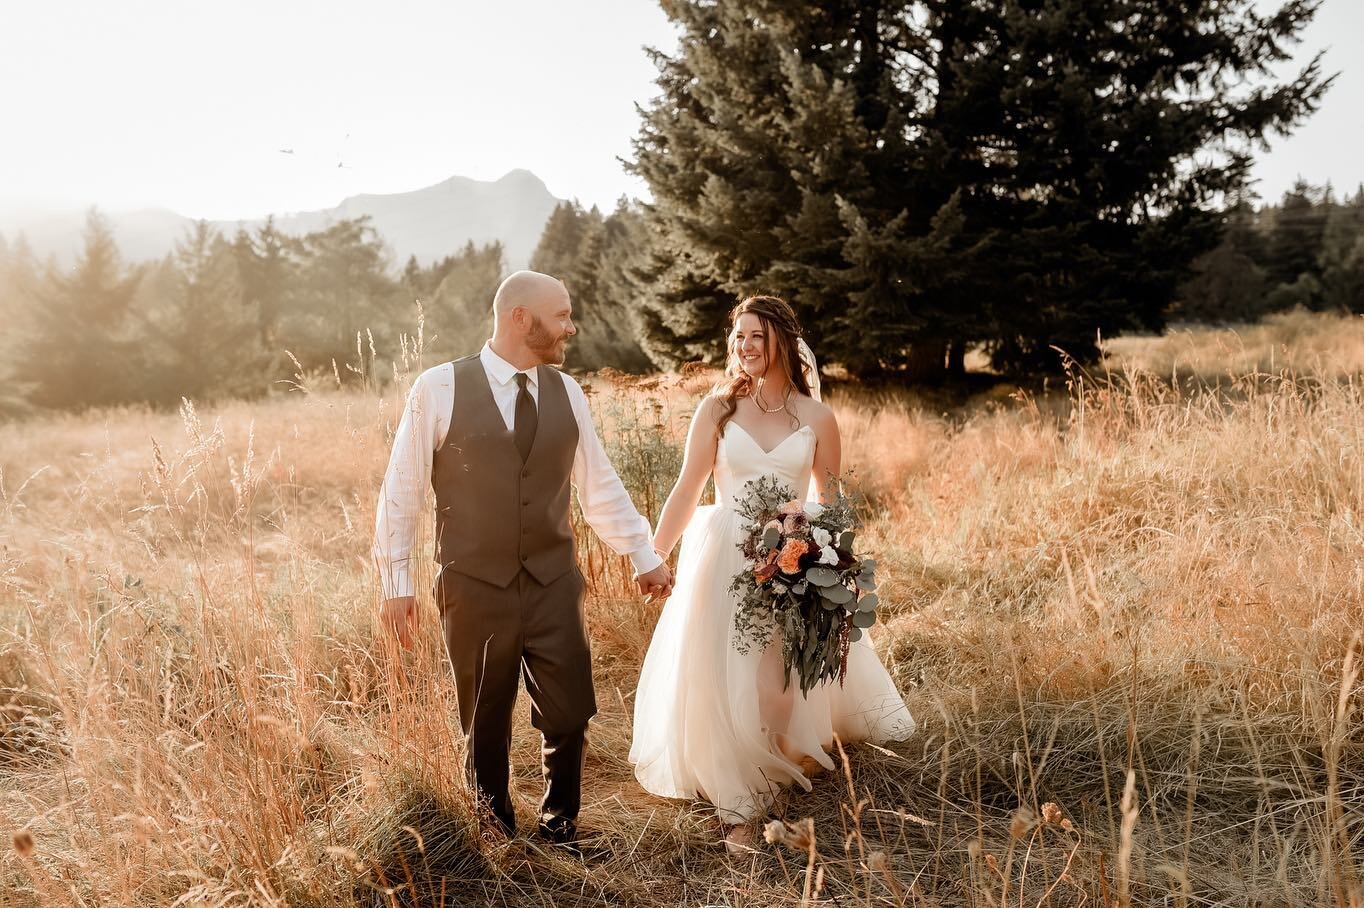 Double wedding weekends don&rsquo;t generally happen too much around here but this week was gooooooddd and so worth the craziness! Nichole and Jeff had a beautiful wedding in the Gorge at one of my favorite venues @mapleleafevents . The sun was shini